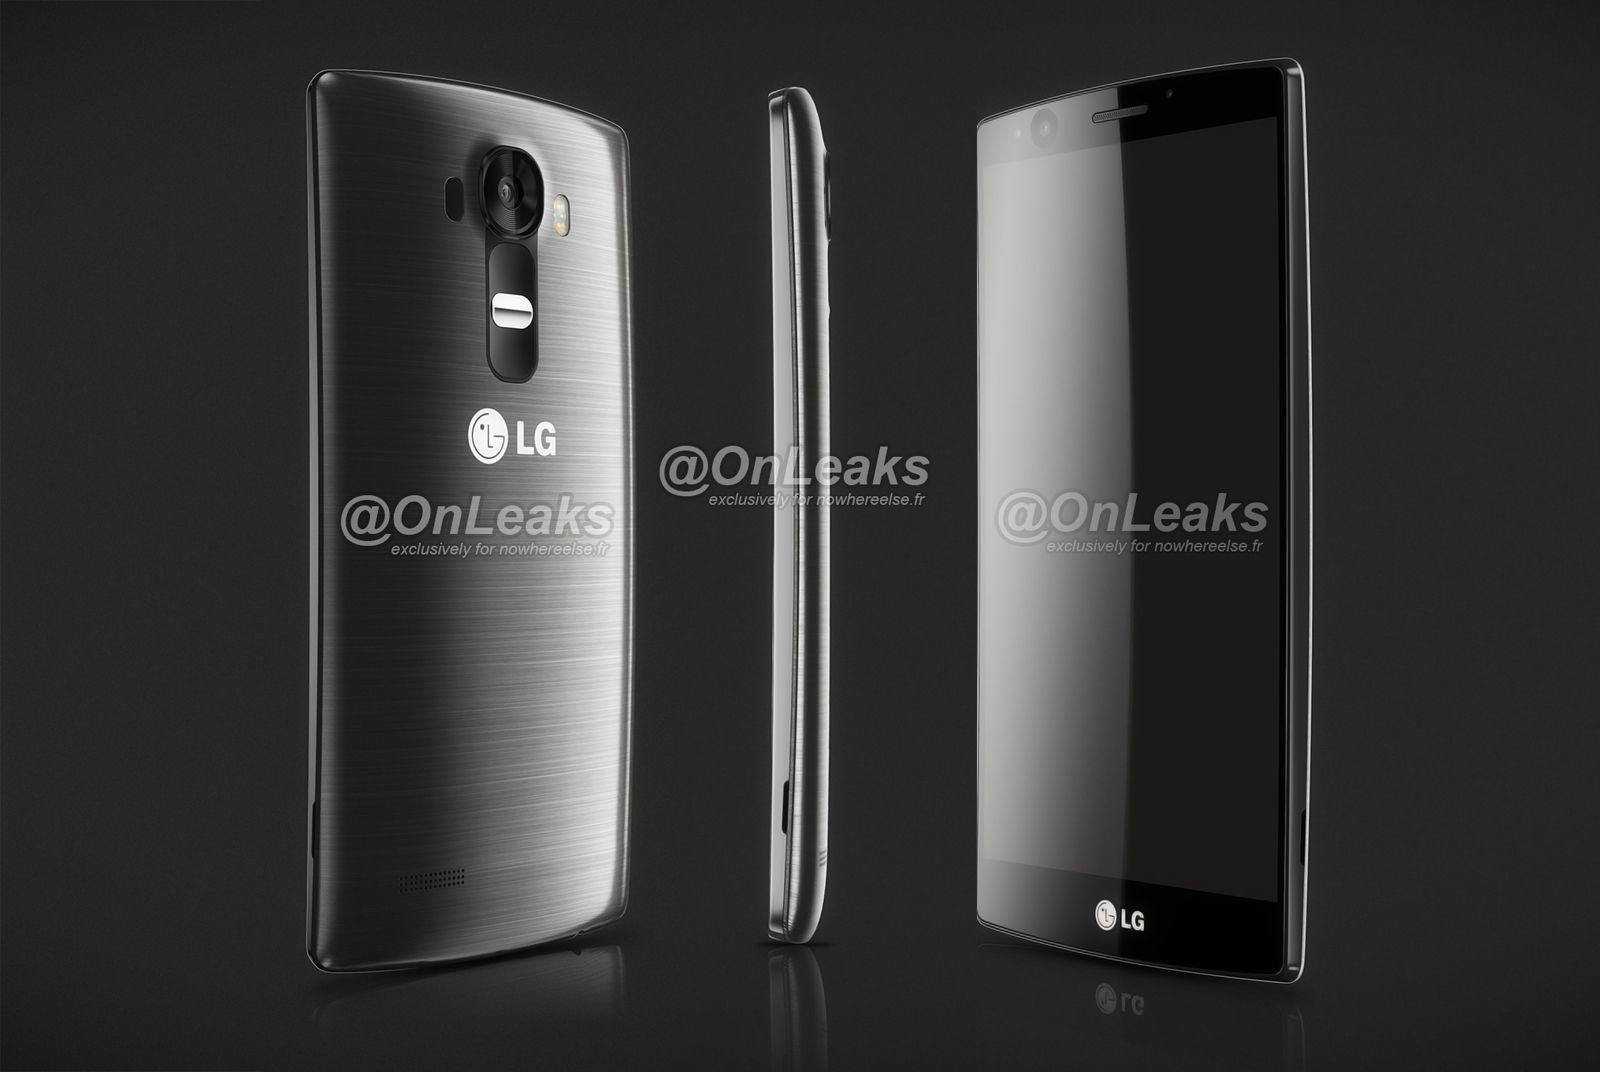 leaked lg g4 images suggests it will have a curved display image 1